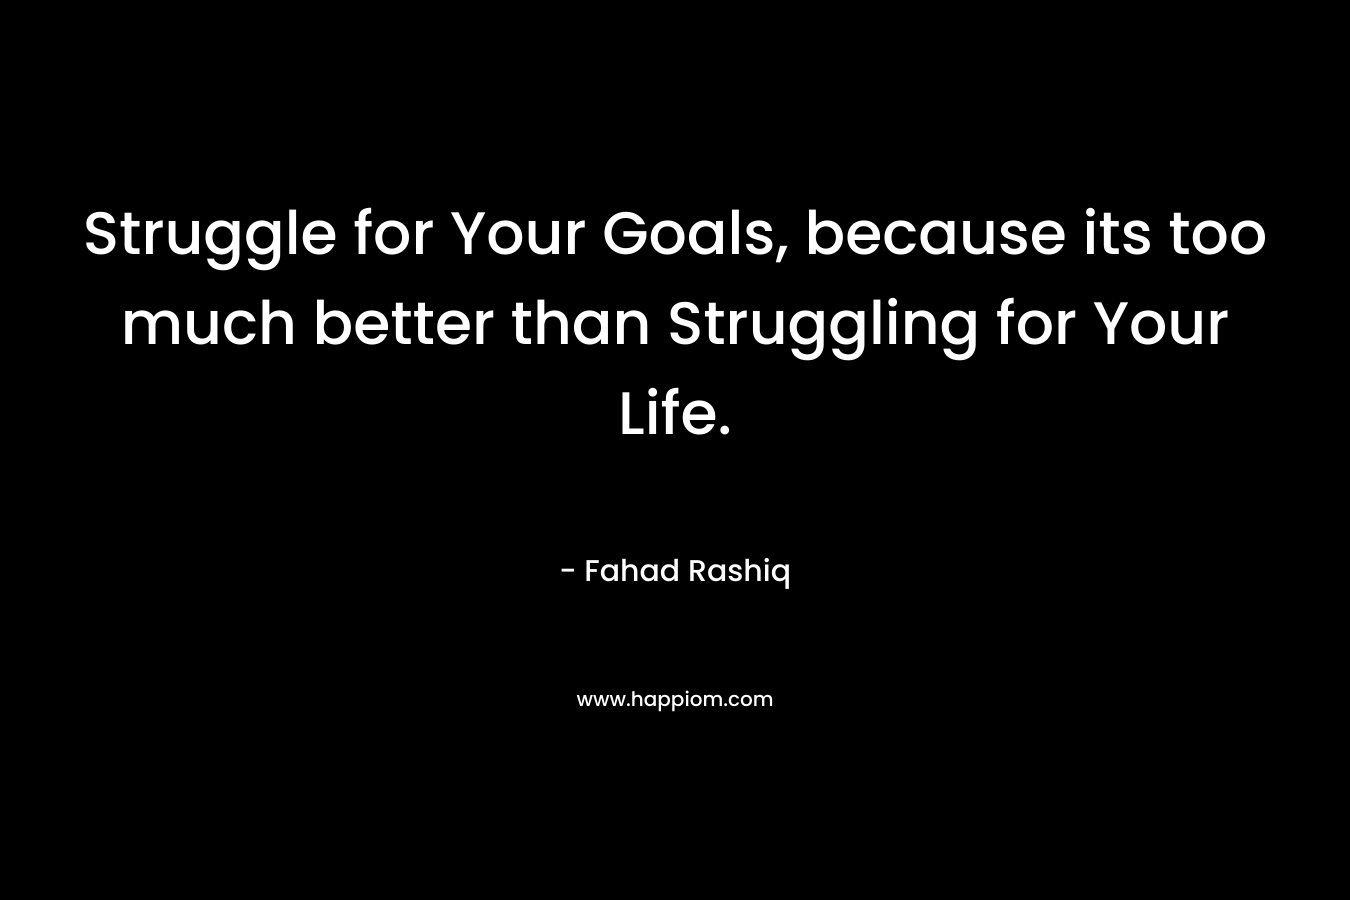 Struggle for Your Goals, because its too much better than Struggling for Your Life. – Fahad Rashiq